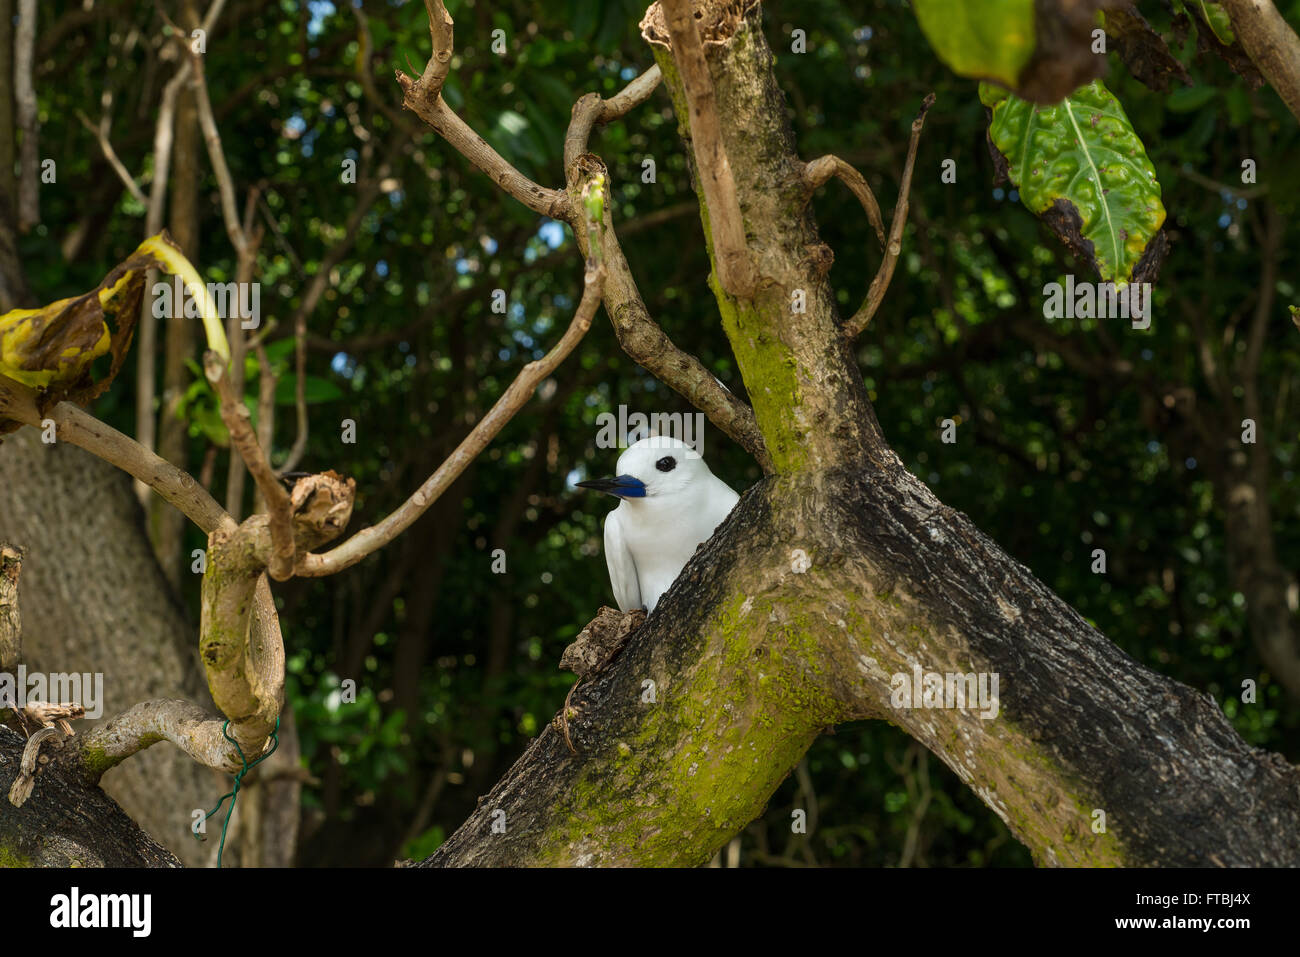 A fairy or white tern sitting on a nest branch in the Seychelles Stock Photo